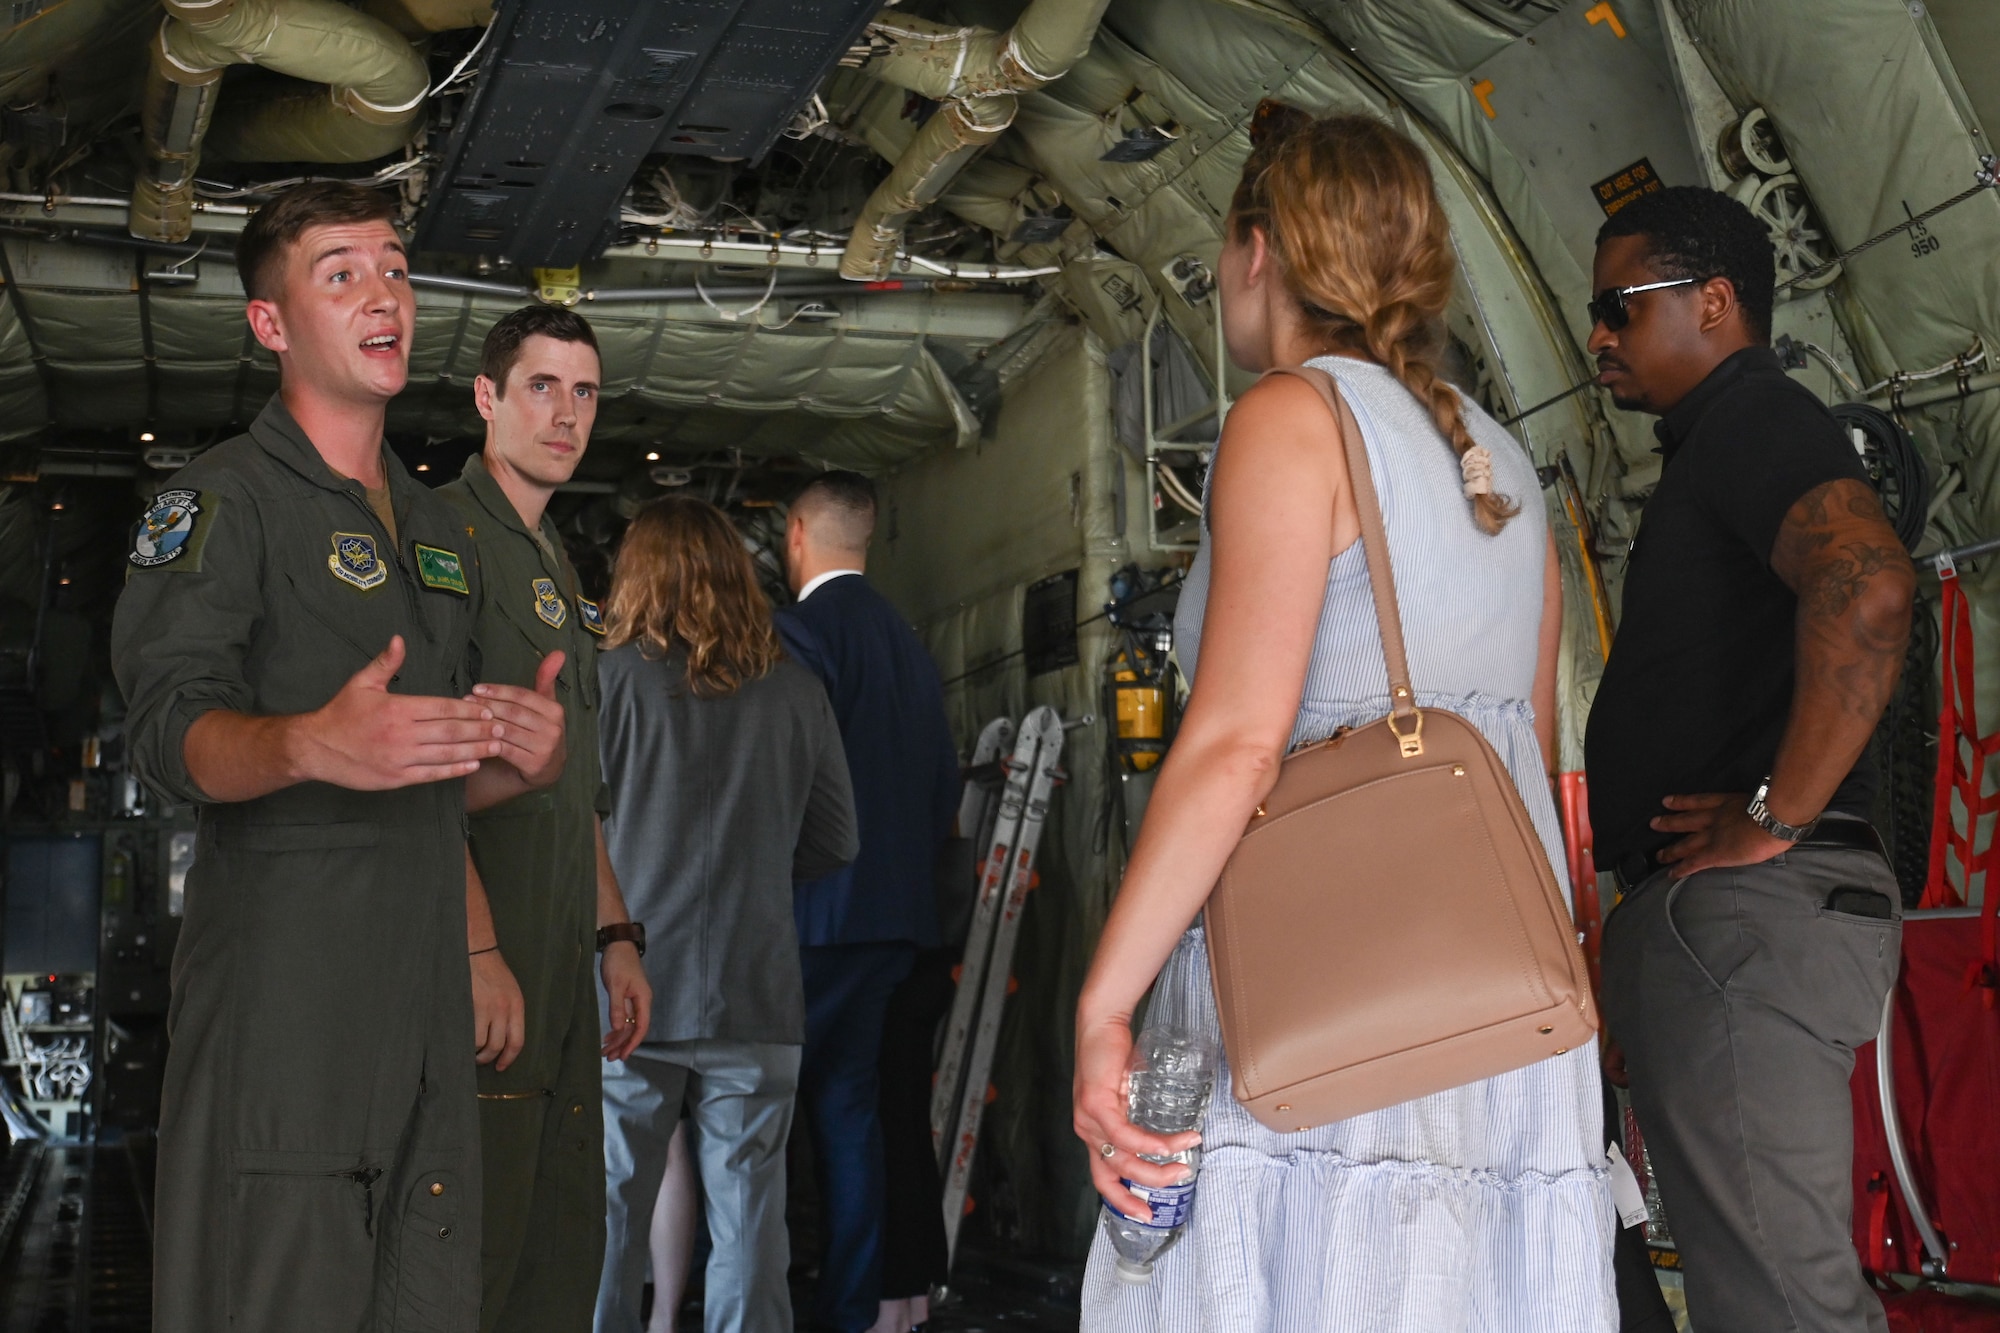 People tour the inside of an aircraft.